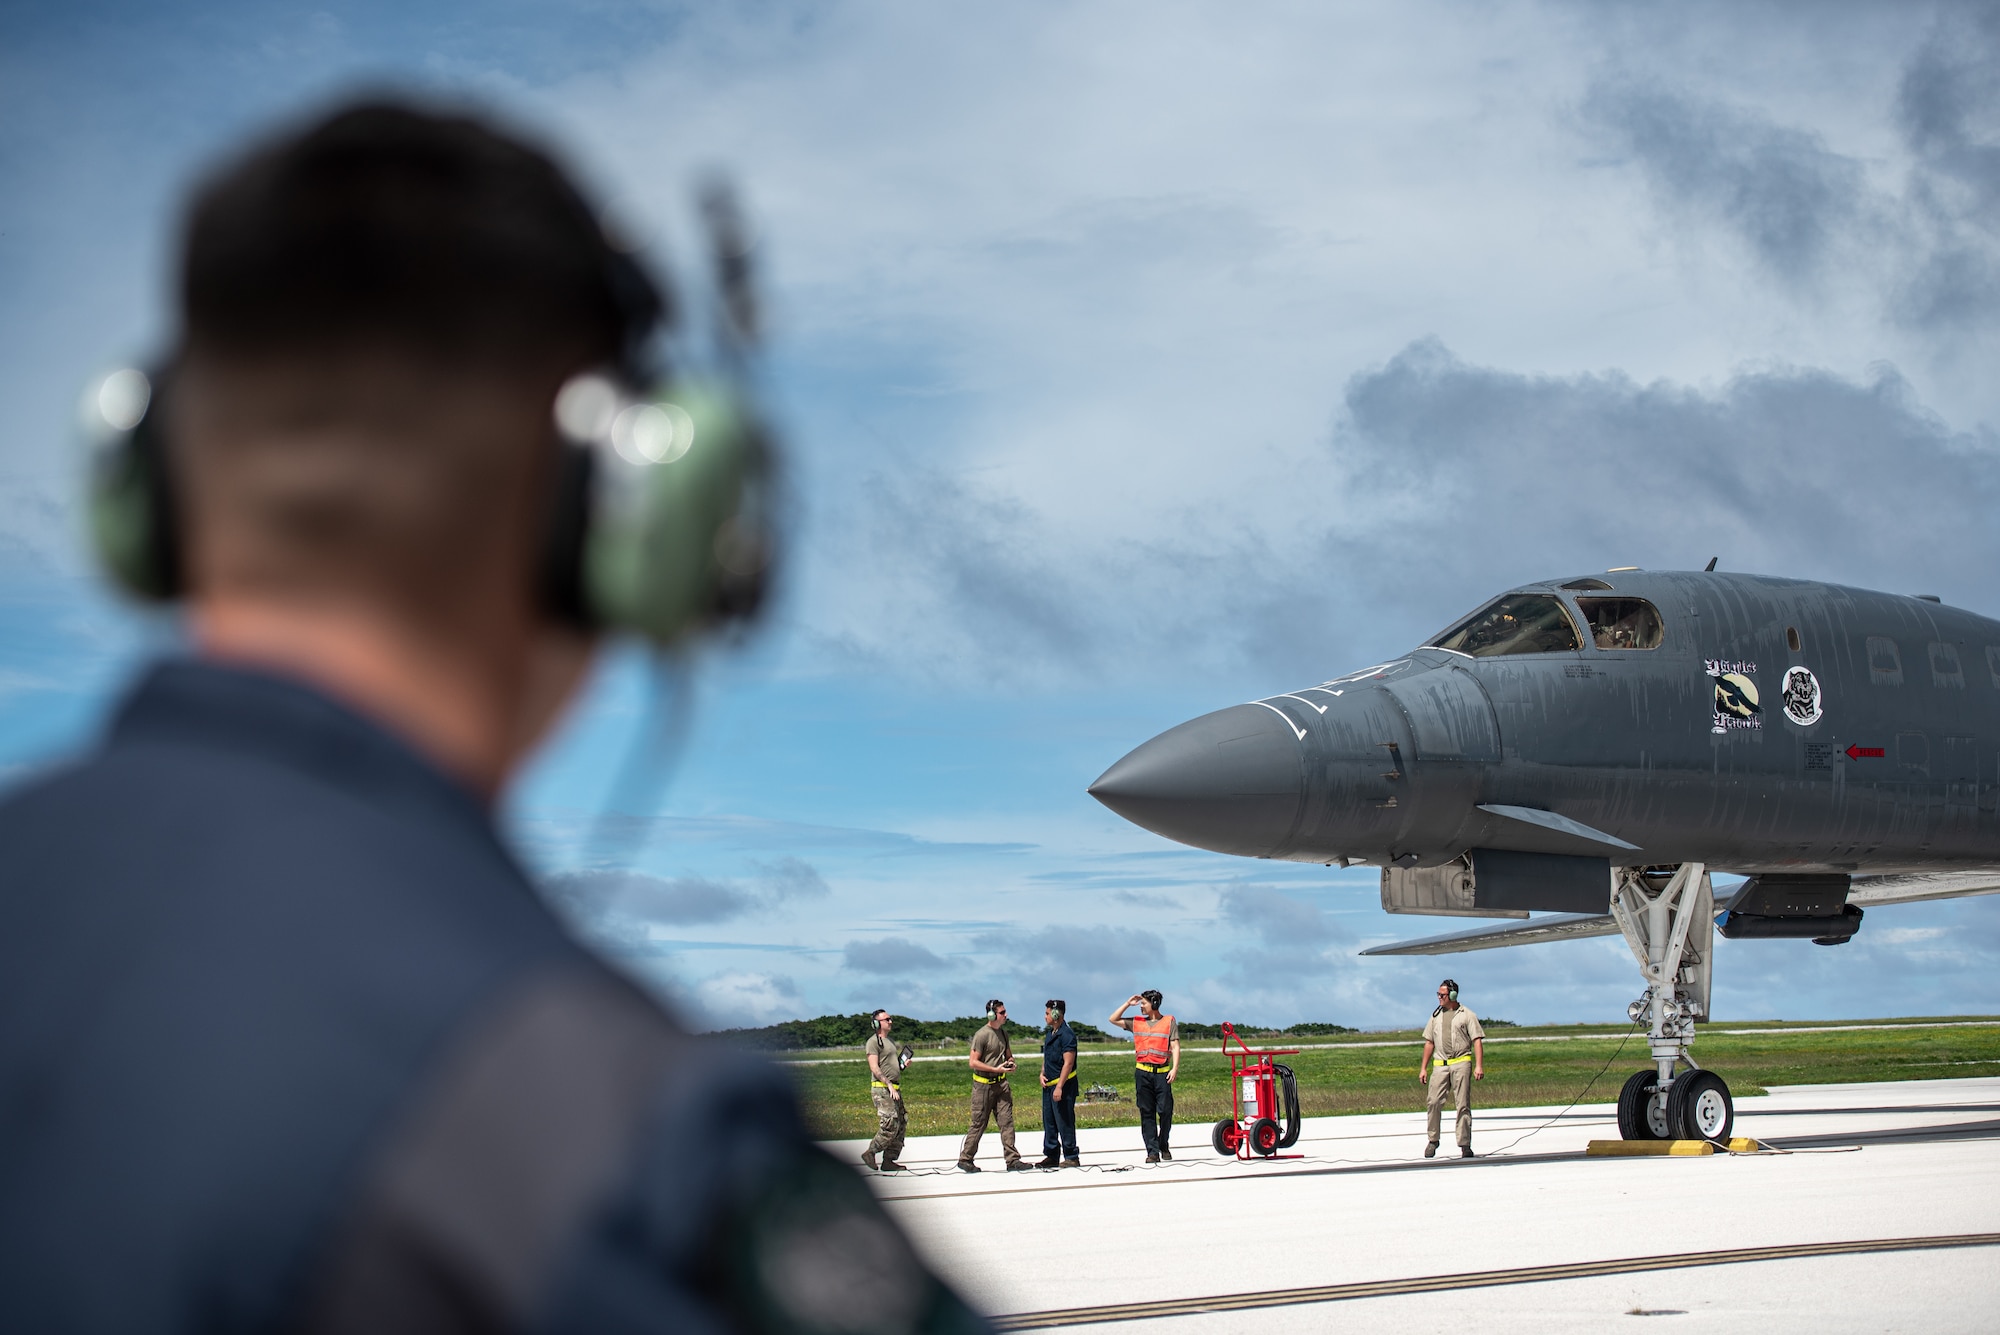 Airmen assigned to the 28th Bomb Wing recieve a U.S. Air Force B-1B Lancer assigned to the 37th Expeditionary Bomb Squadron, Ellsworth Air Force Base, South Dakota, at Andersen Air Force Base, Guam, Oct. 18, 2022. Bomber missions contribute to joint force lethality and deter aggression in the Indo-Pacific by demonstrating the U.S. Air Force’s ability to operate anywhere in the world at any time in support of the National Defense Strategy. (U.S. Air Force photo by Senior Airman Yosselin Campos)